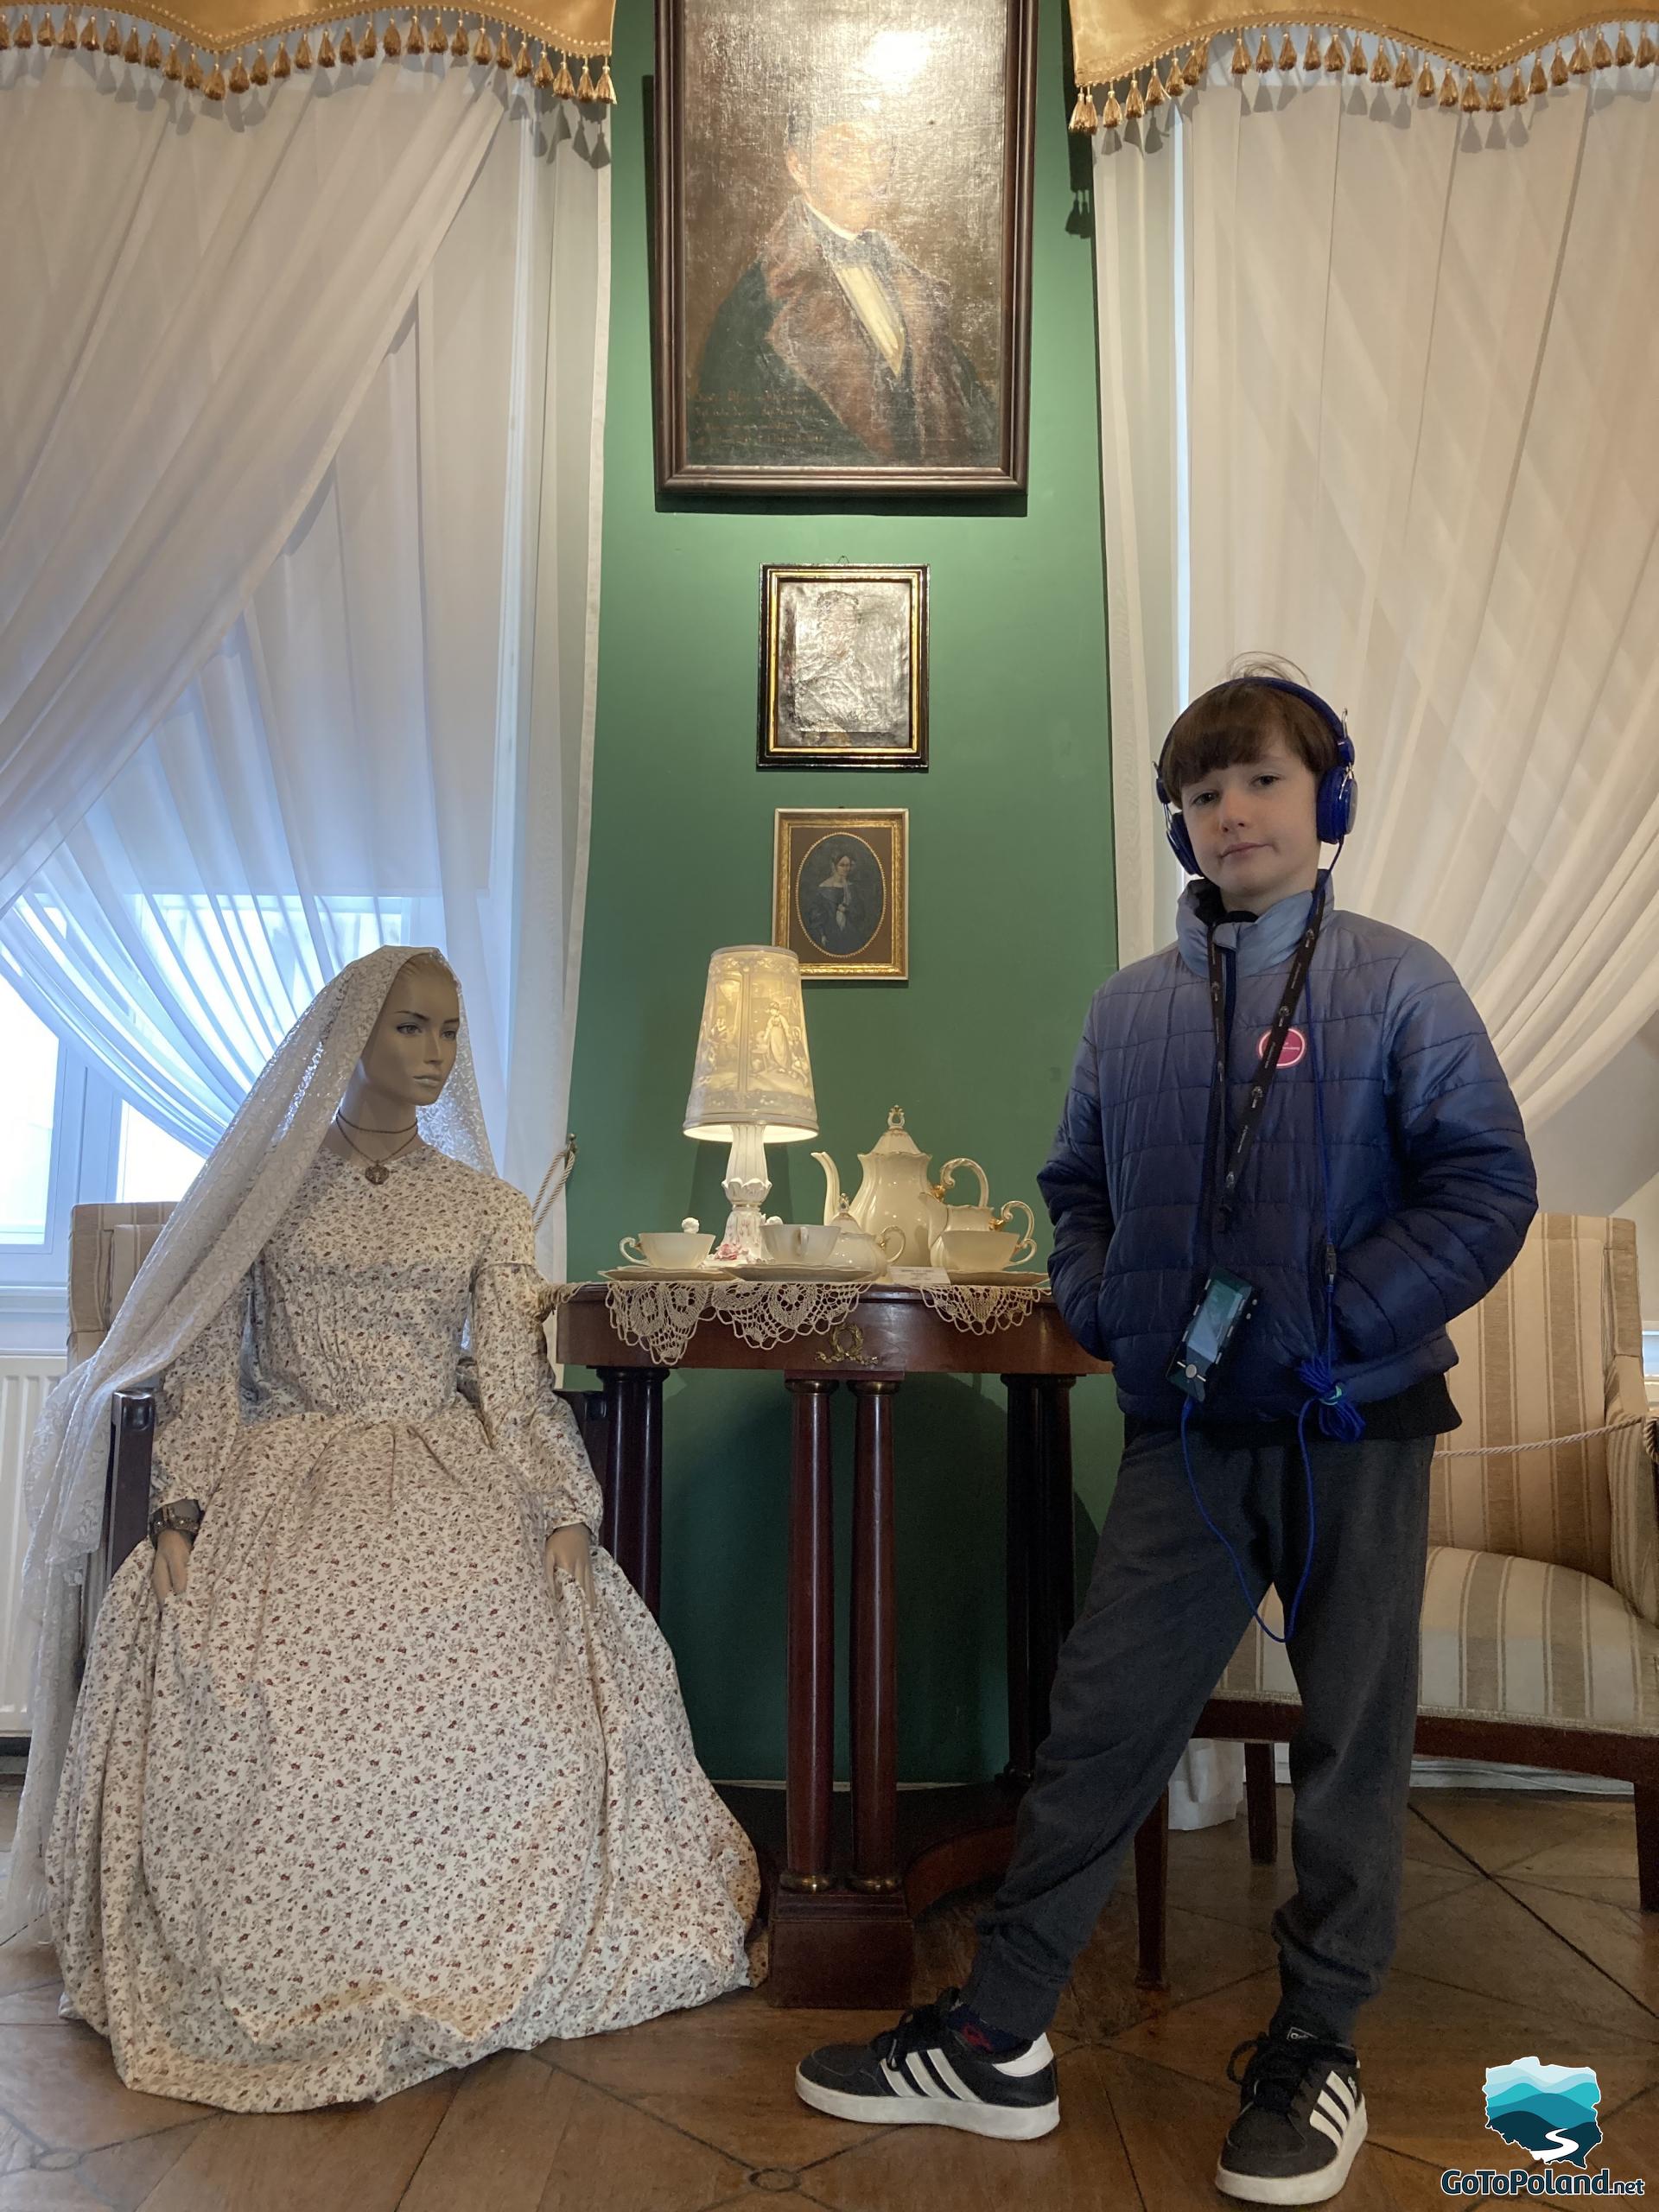 a boy is standing next to the artificial model of a woman, on the table there is a porcelain set